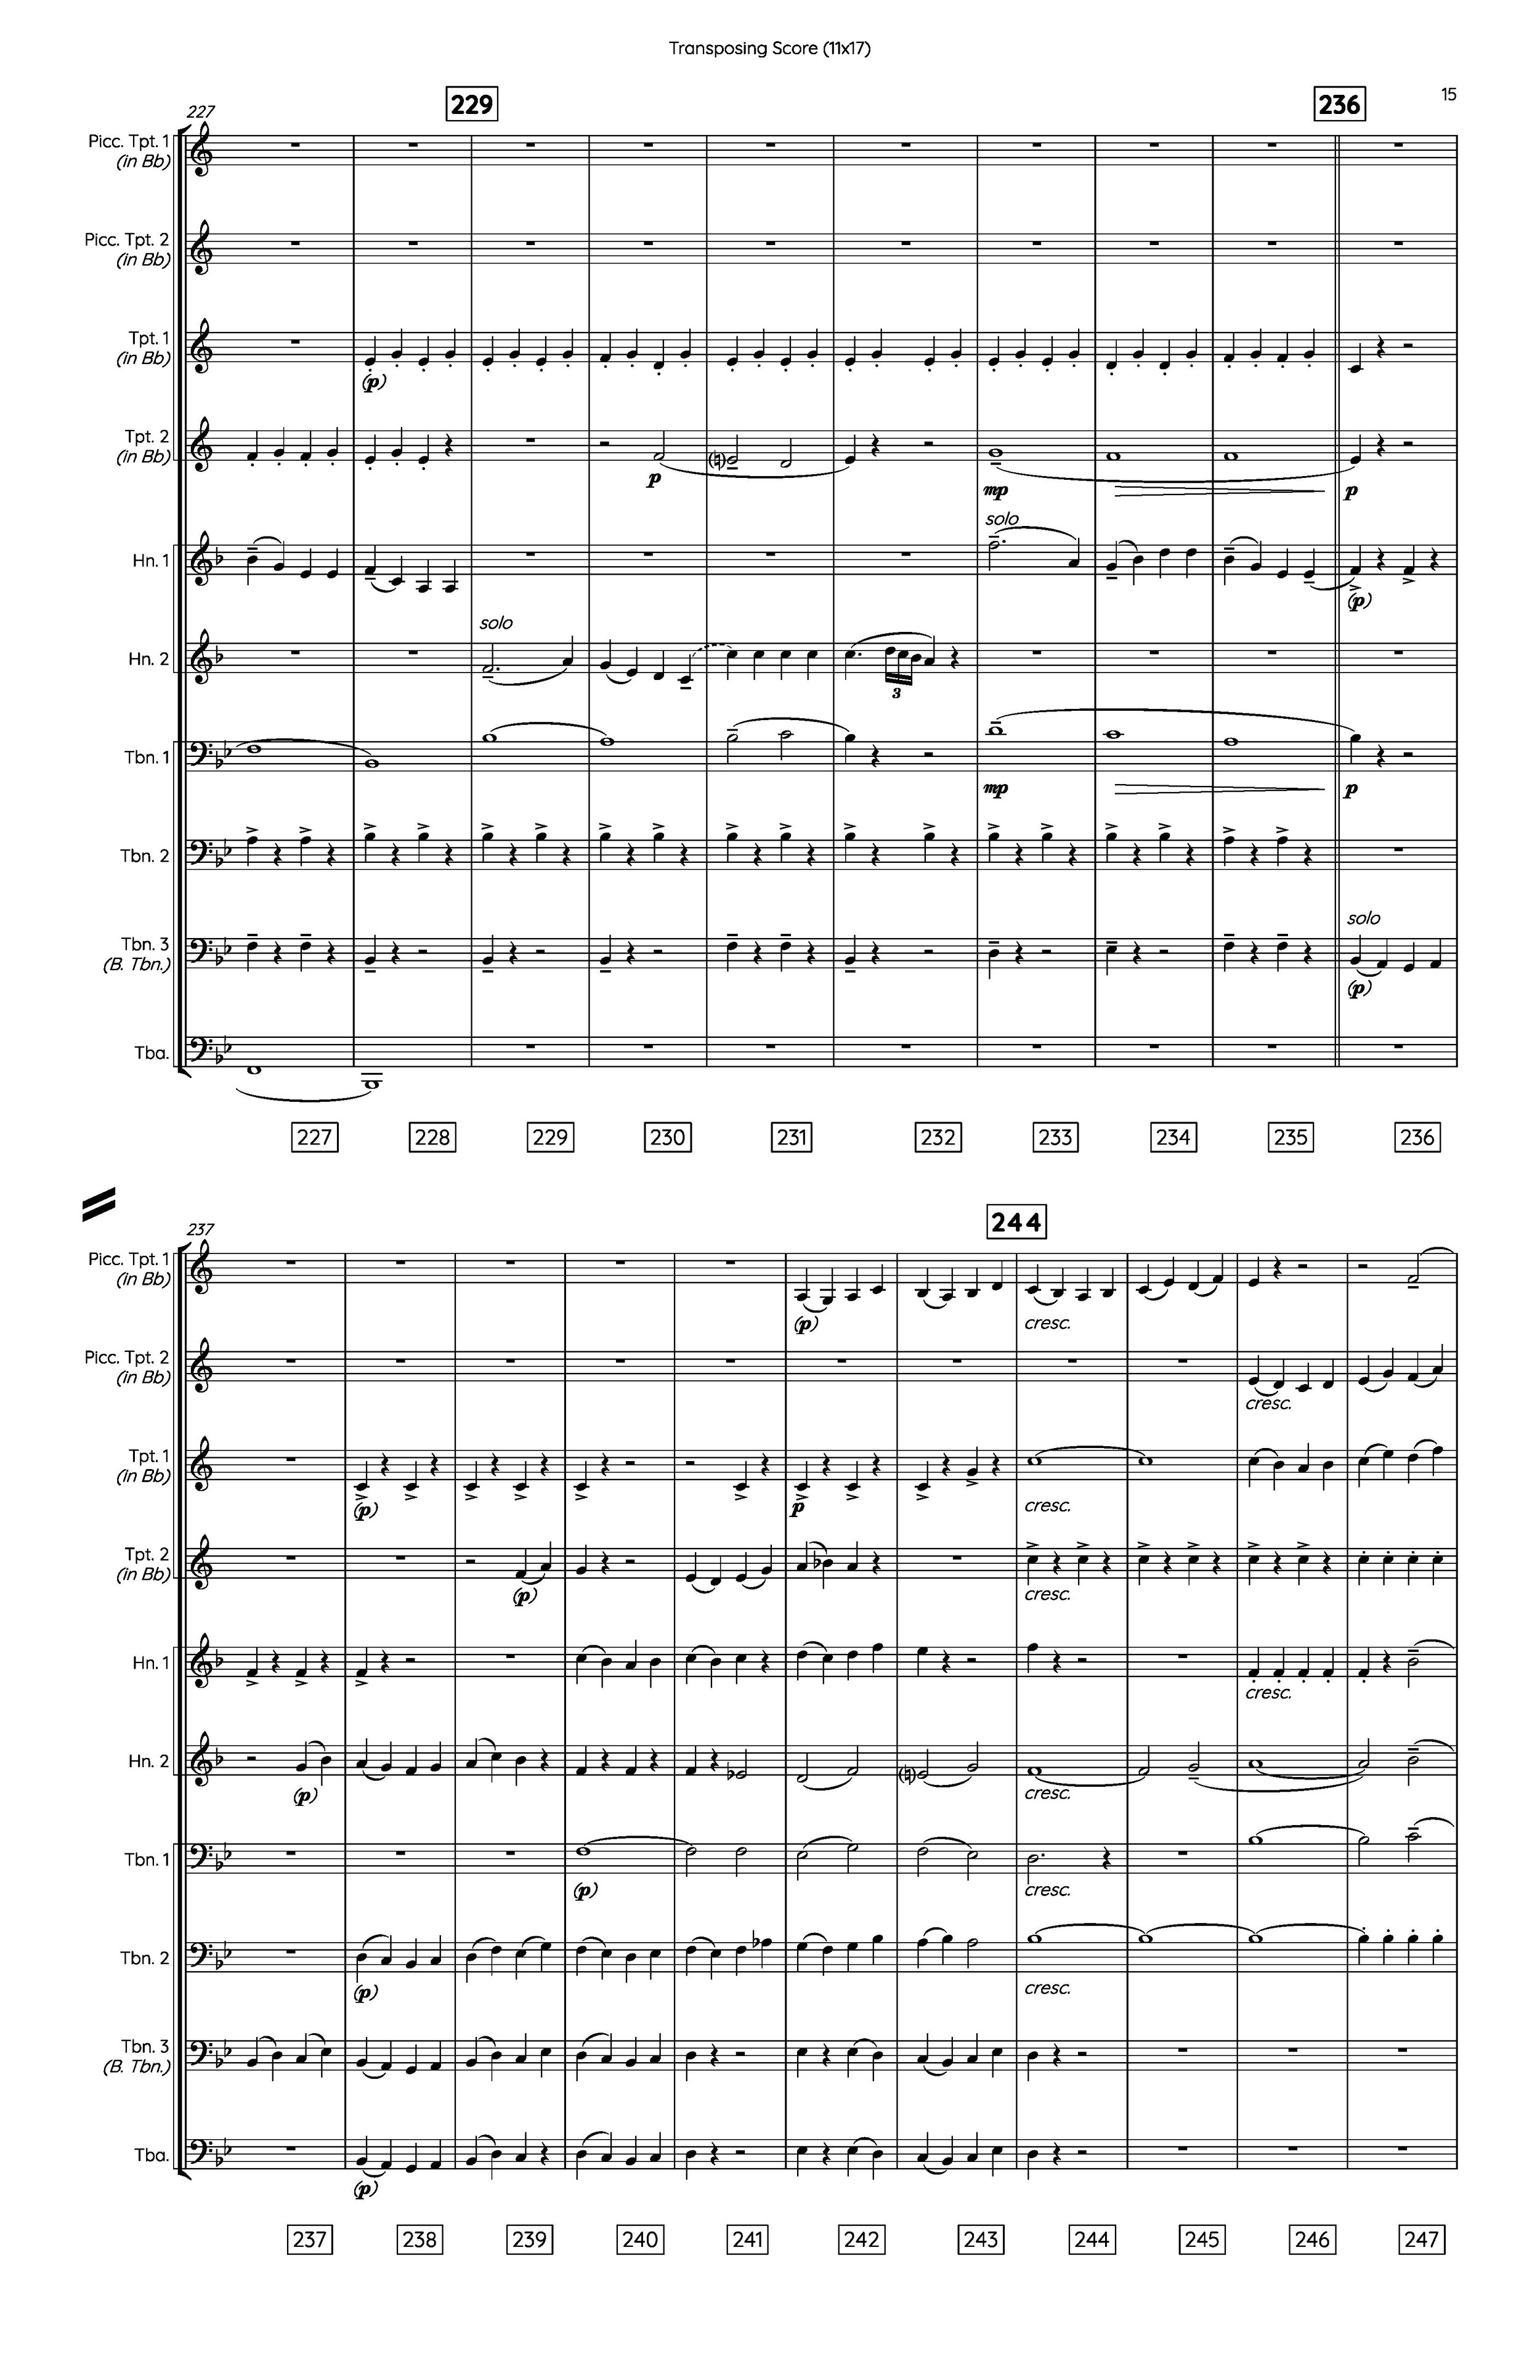 Marriage of Figaro [Brass Ensemble] in Bb - Score 11x17_Page_15.jpg